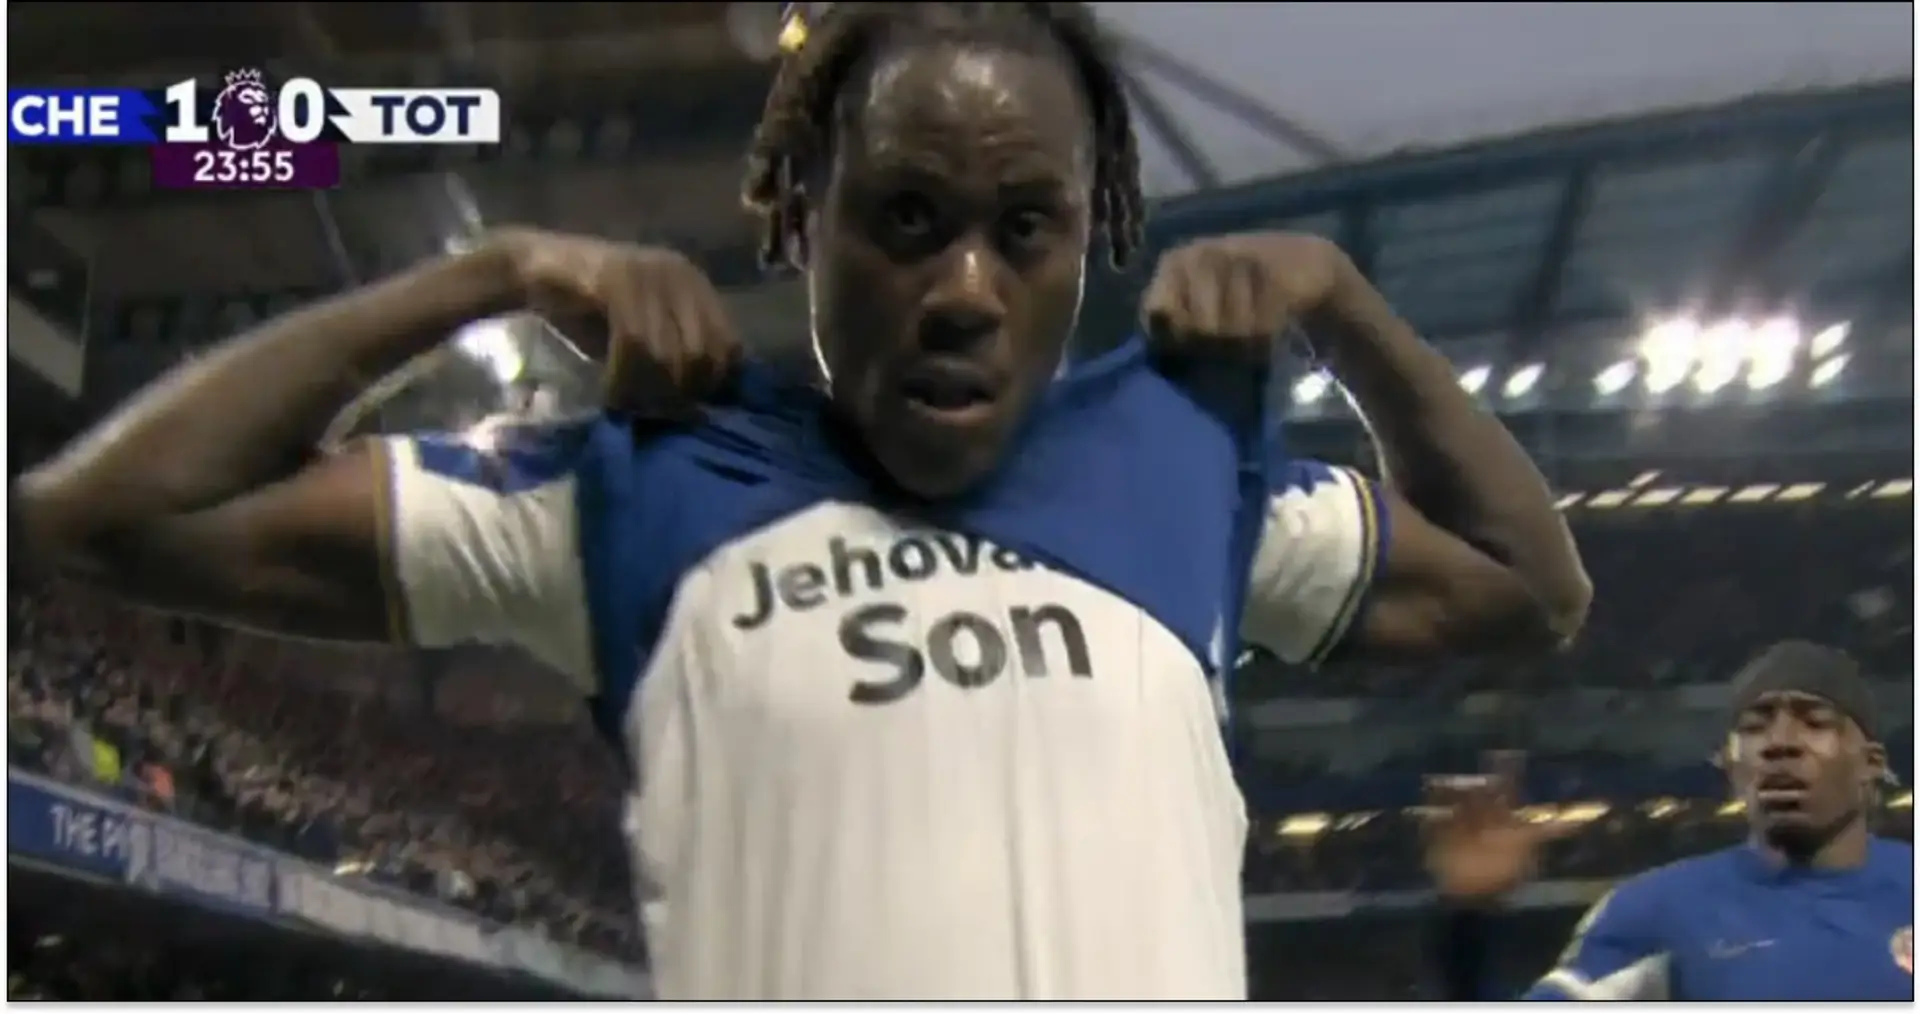 What does Trevoh Chalobah's message underneath his shirt mean?